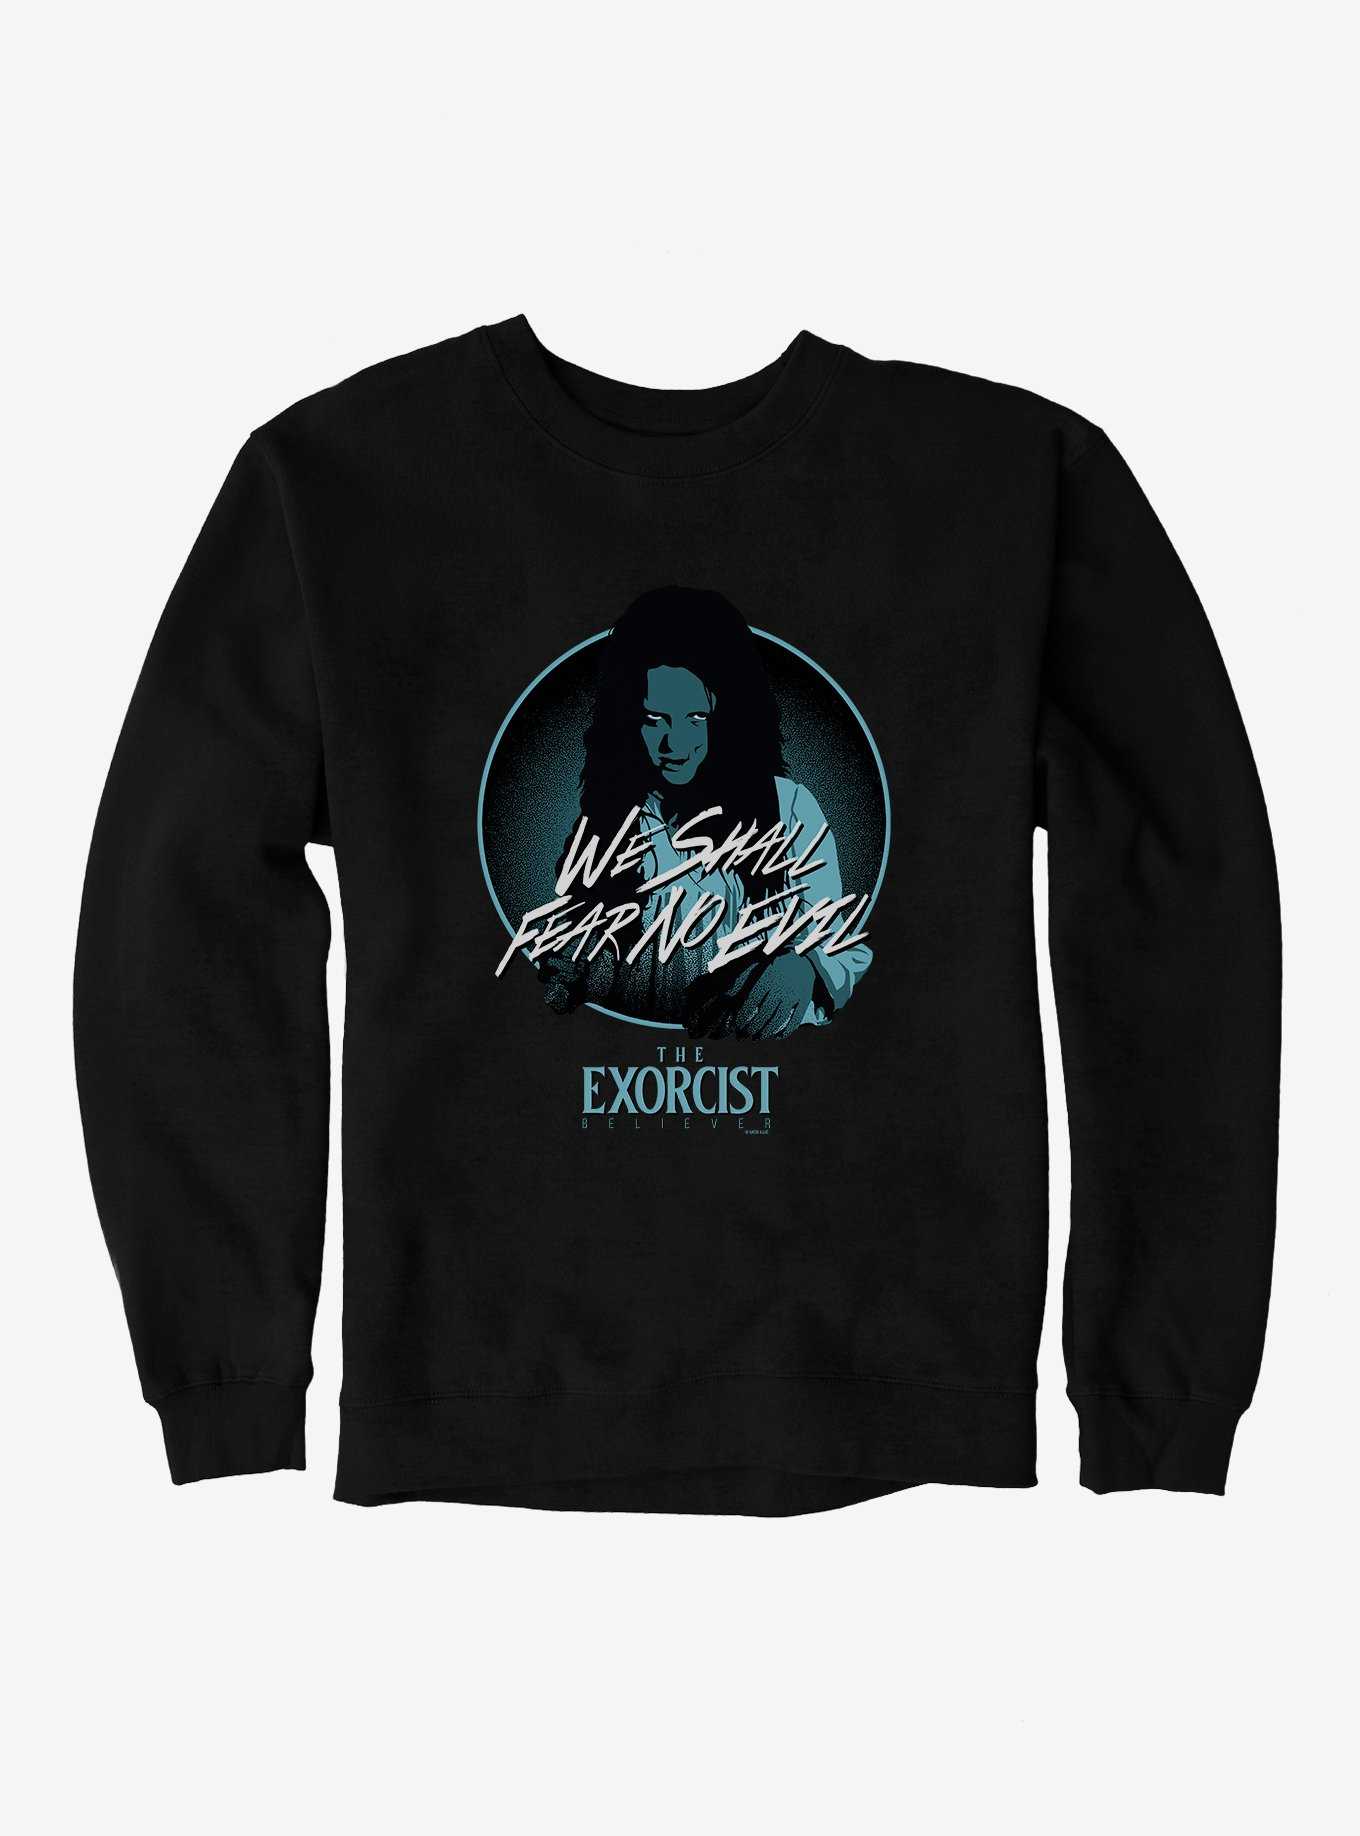 The Exorcist Believer We Shall Fear No Evil Sweatshirt, , hi-res